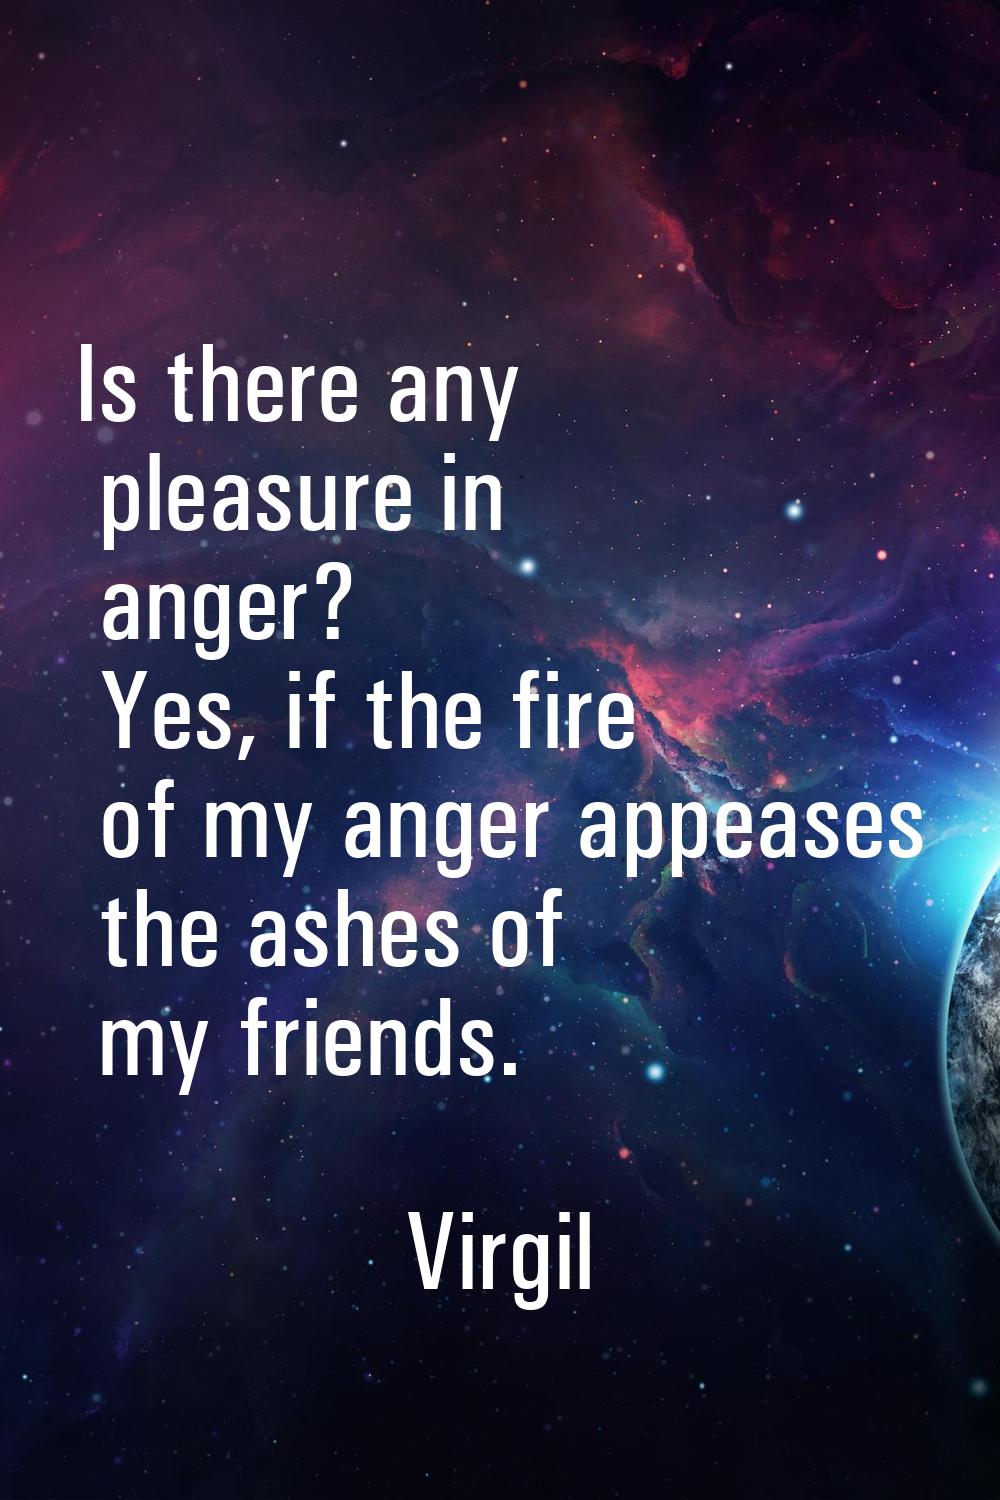 Is there any pleasure in anger? Yes, if the fire of my anger appeases the ashes of my friends.